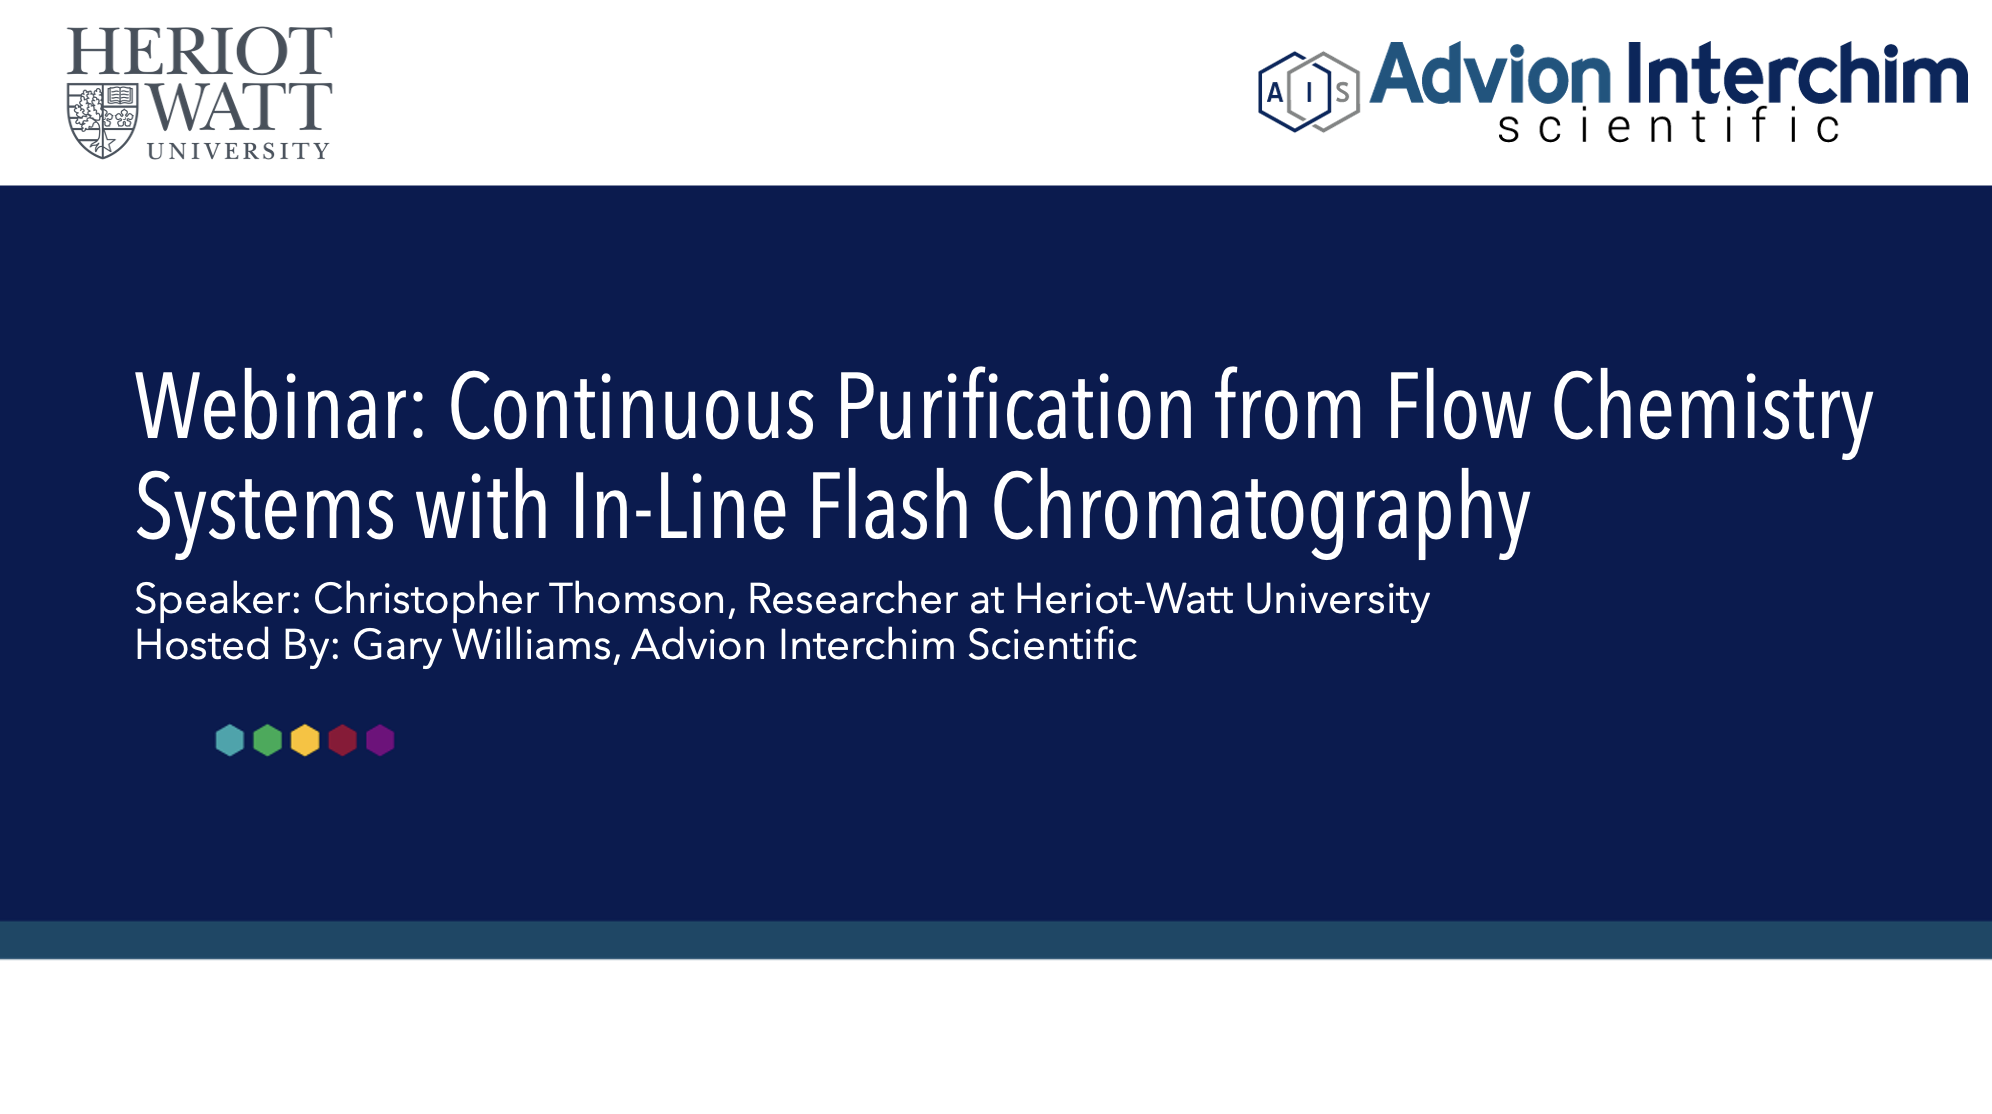 Webinar: Continuous Purification from Flow Chemistry Systems with In-Line Flash Chromatography